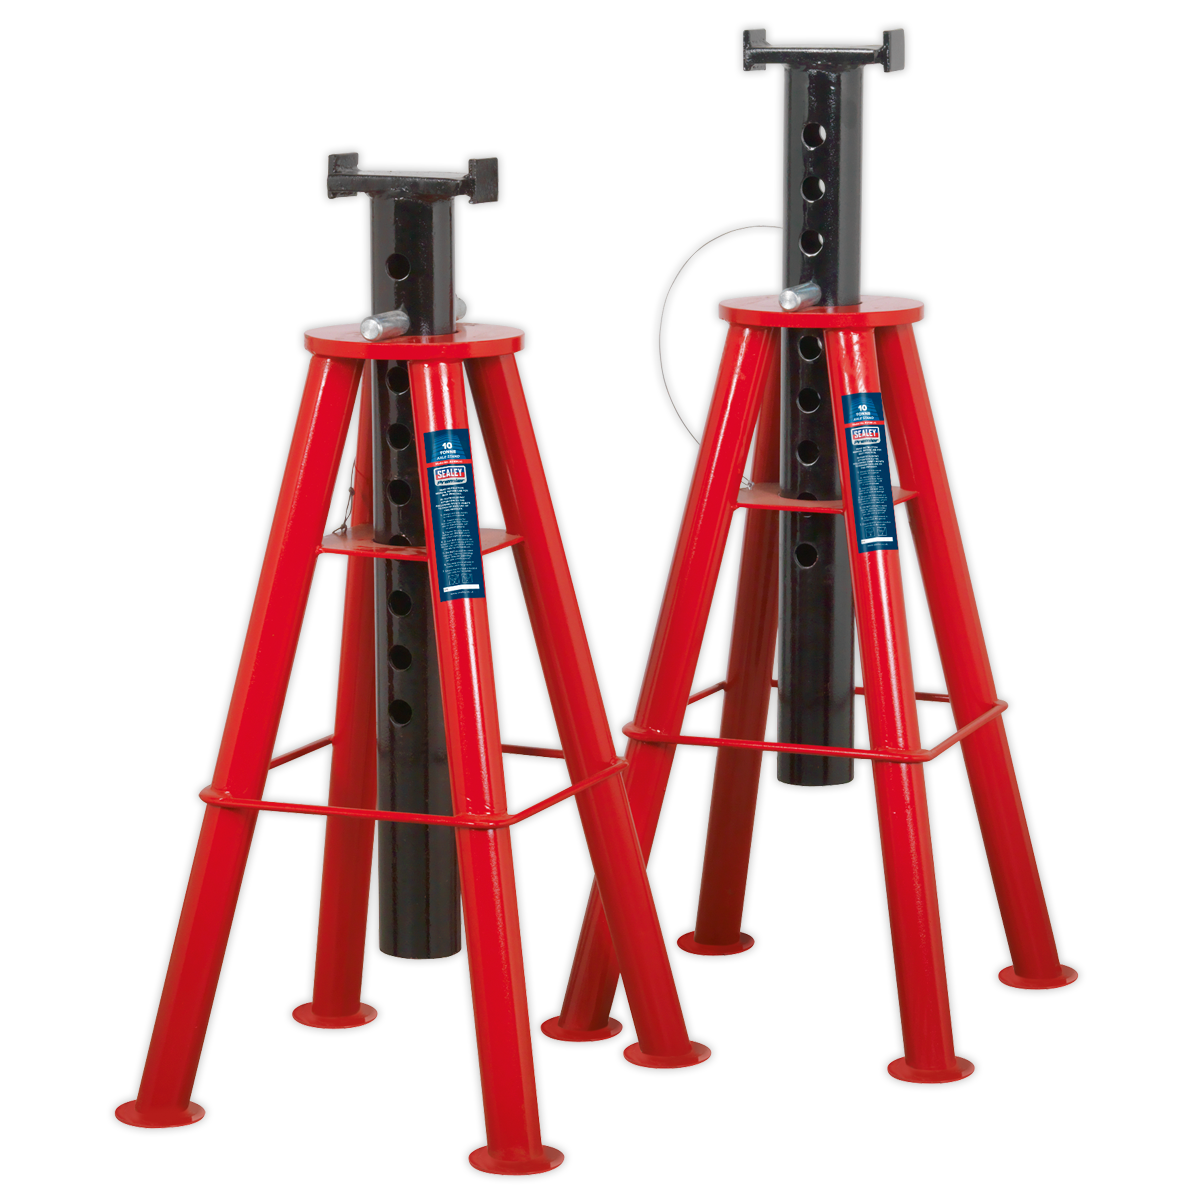 Axle Stands (Pair) 10 Tonne Capacity per Stand High Level - AS10H - Farming Parts